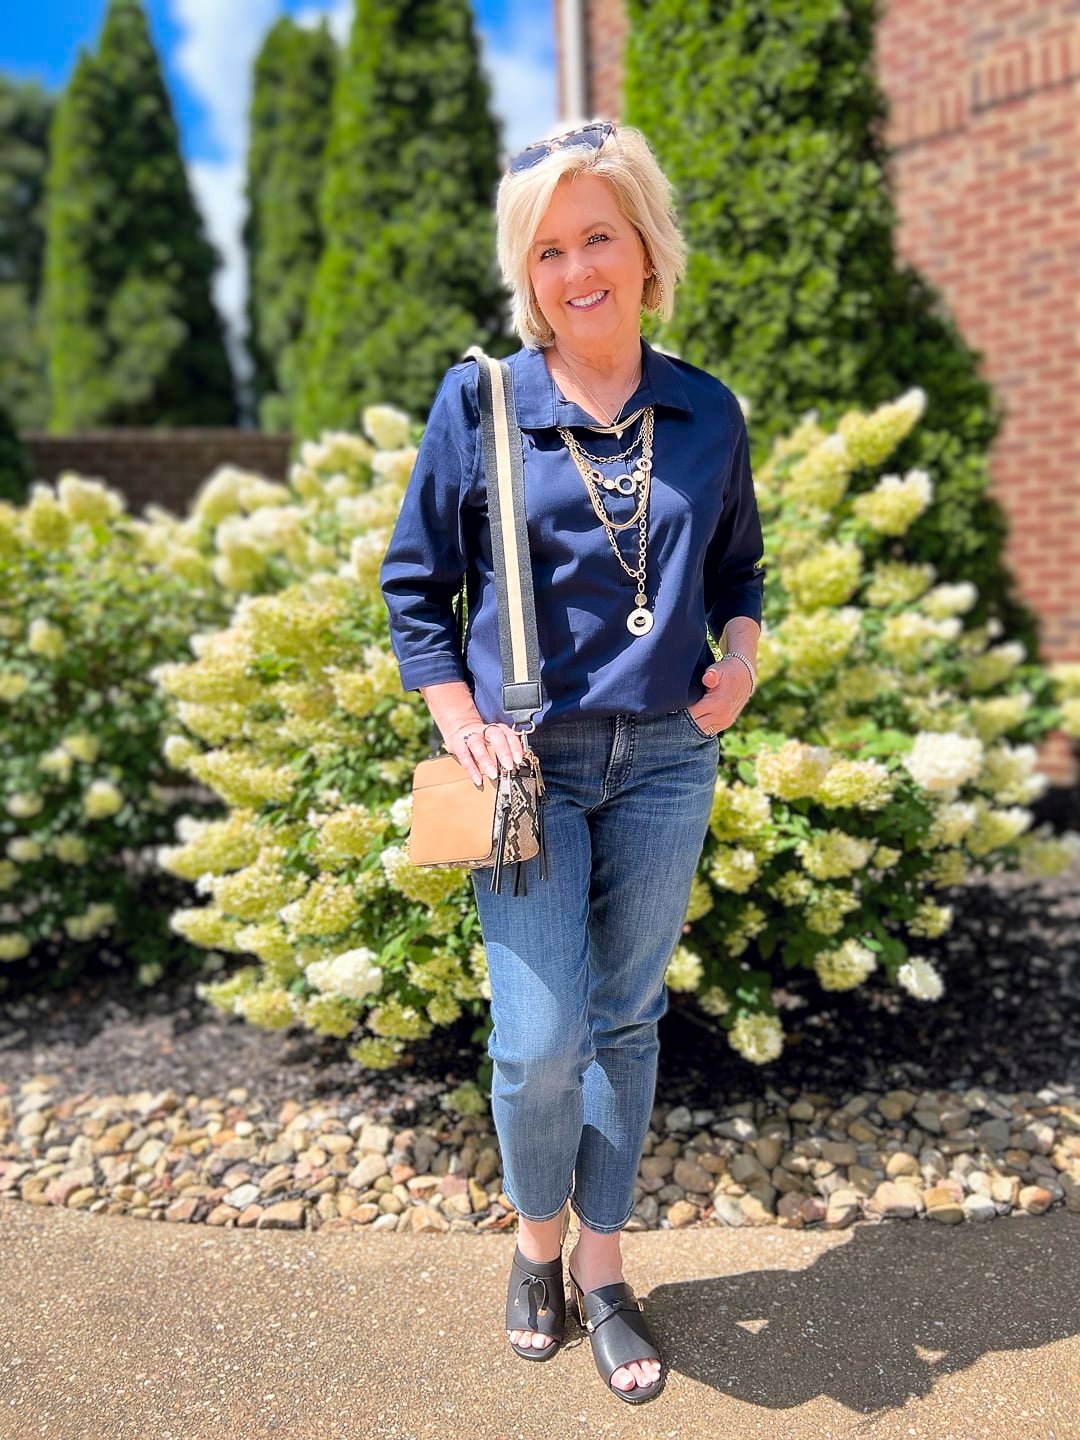 Over 40 Fashion Blogger, Tania Stephens is wearing a Chicos fall transition outfit with straight leg jeans